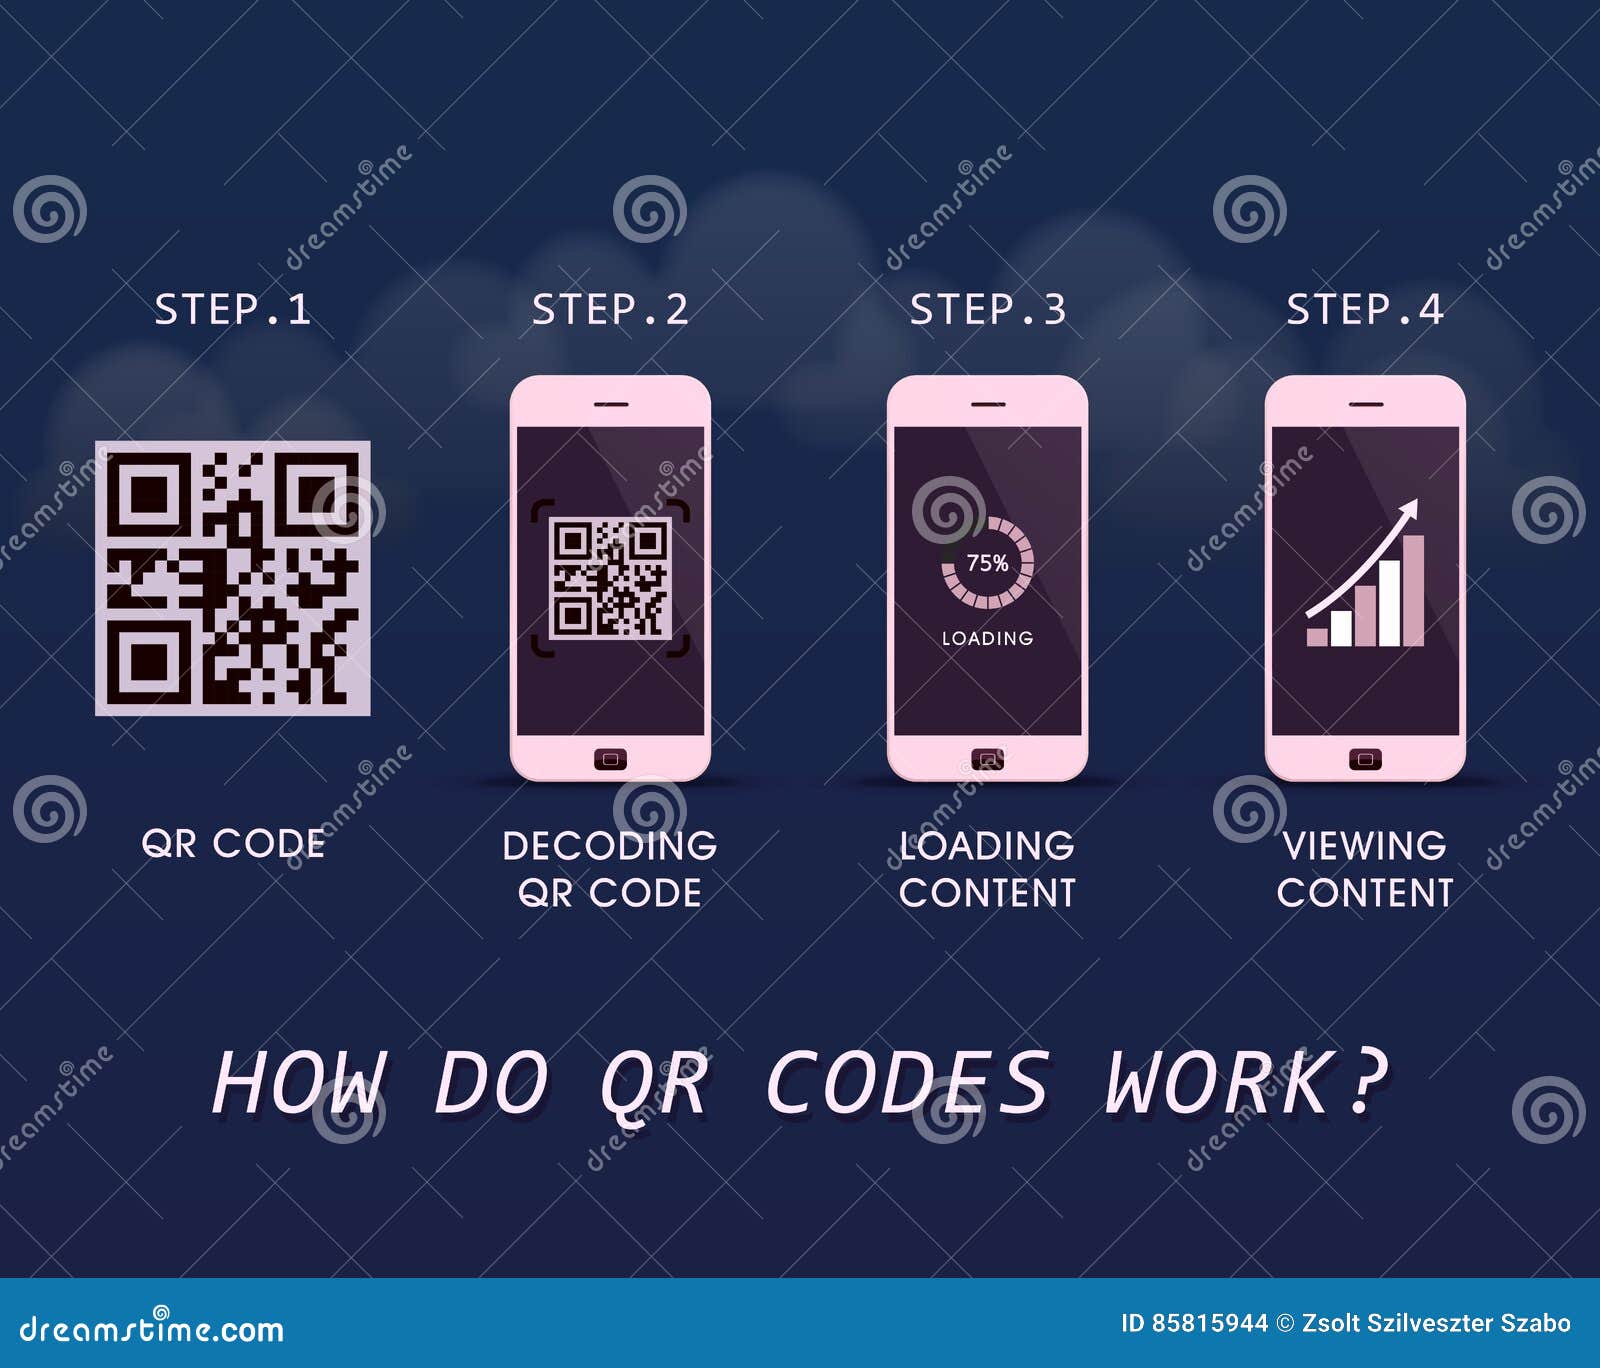 How Do QR Codes Work? - Quick Response Infographic ...